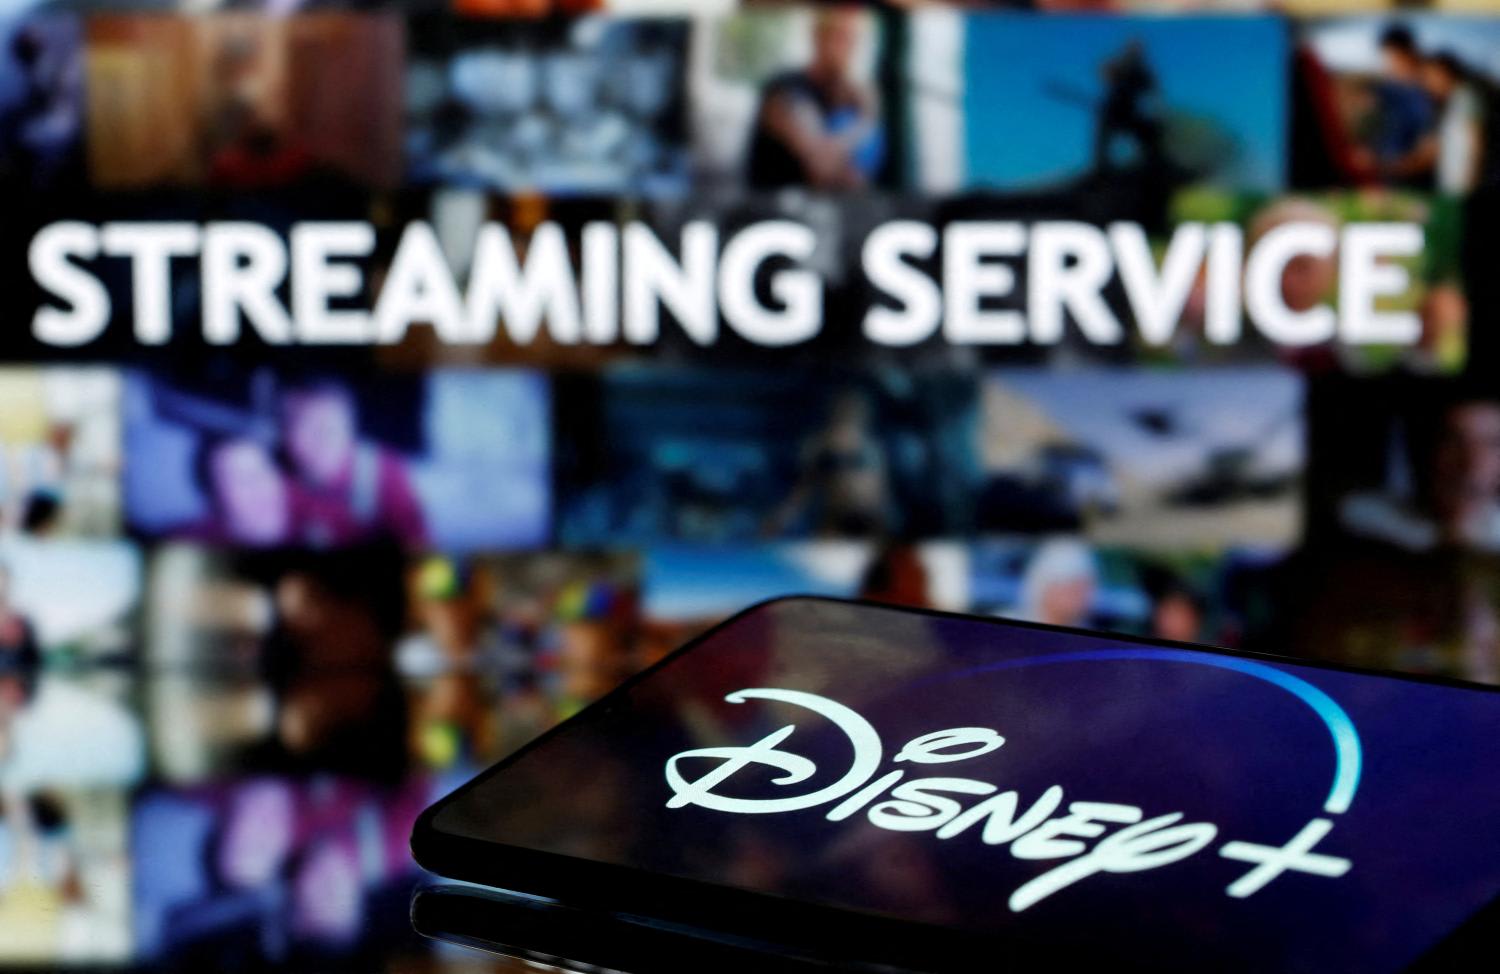 Disney in 2017 staked its future on building a streaming service to rival Netflix as audiences moved to online viewing from traditional cable and broadcast television.